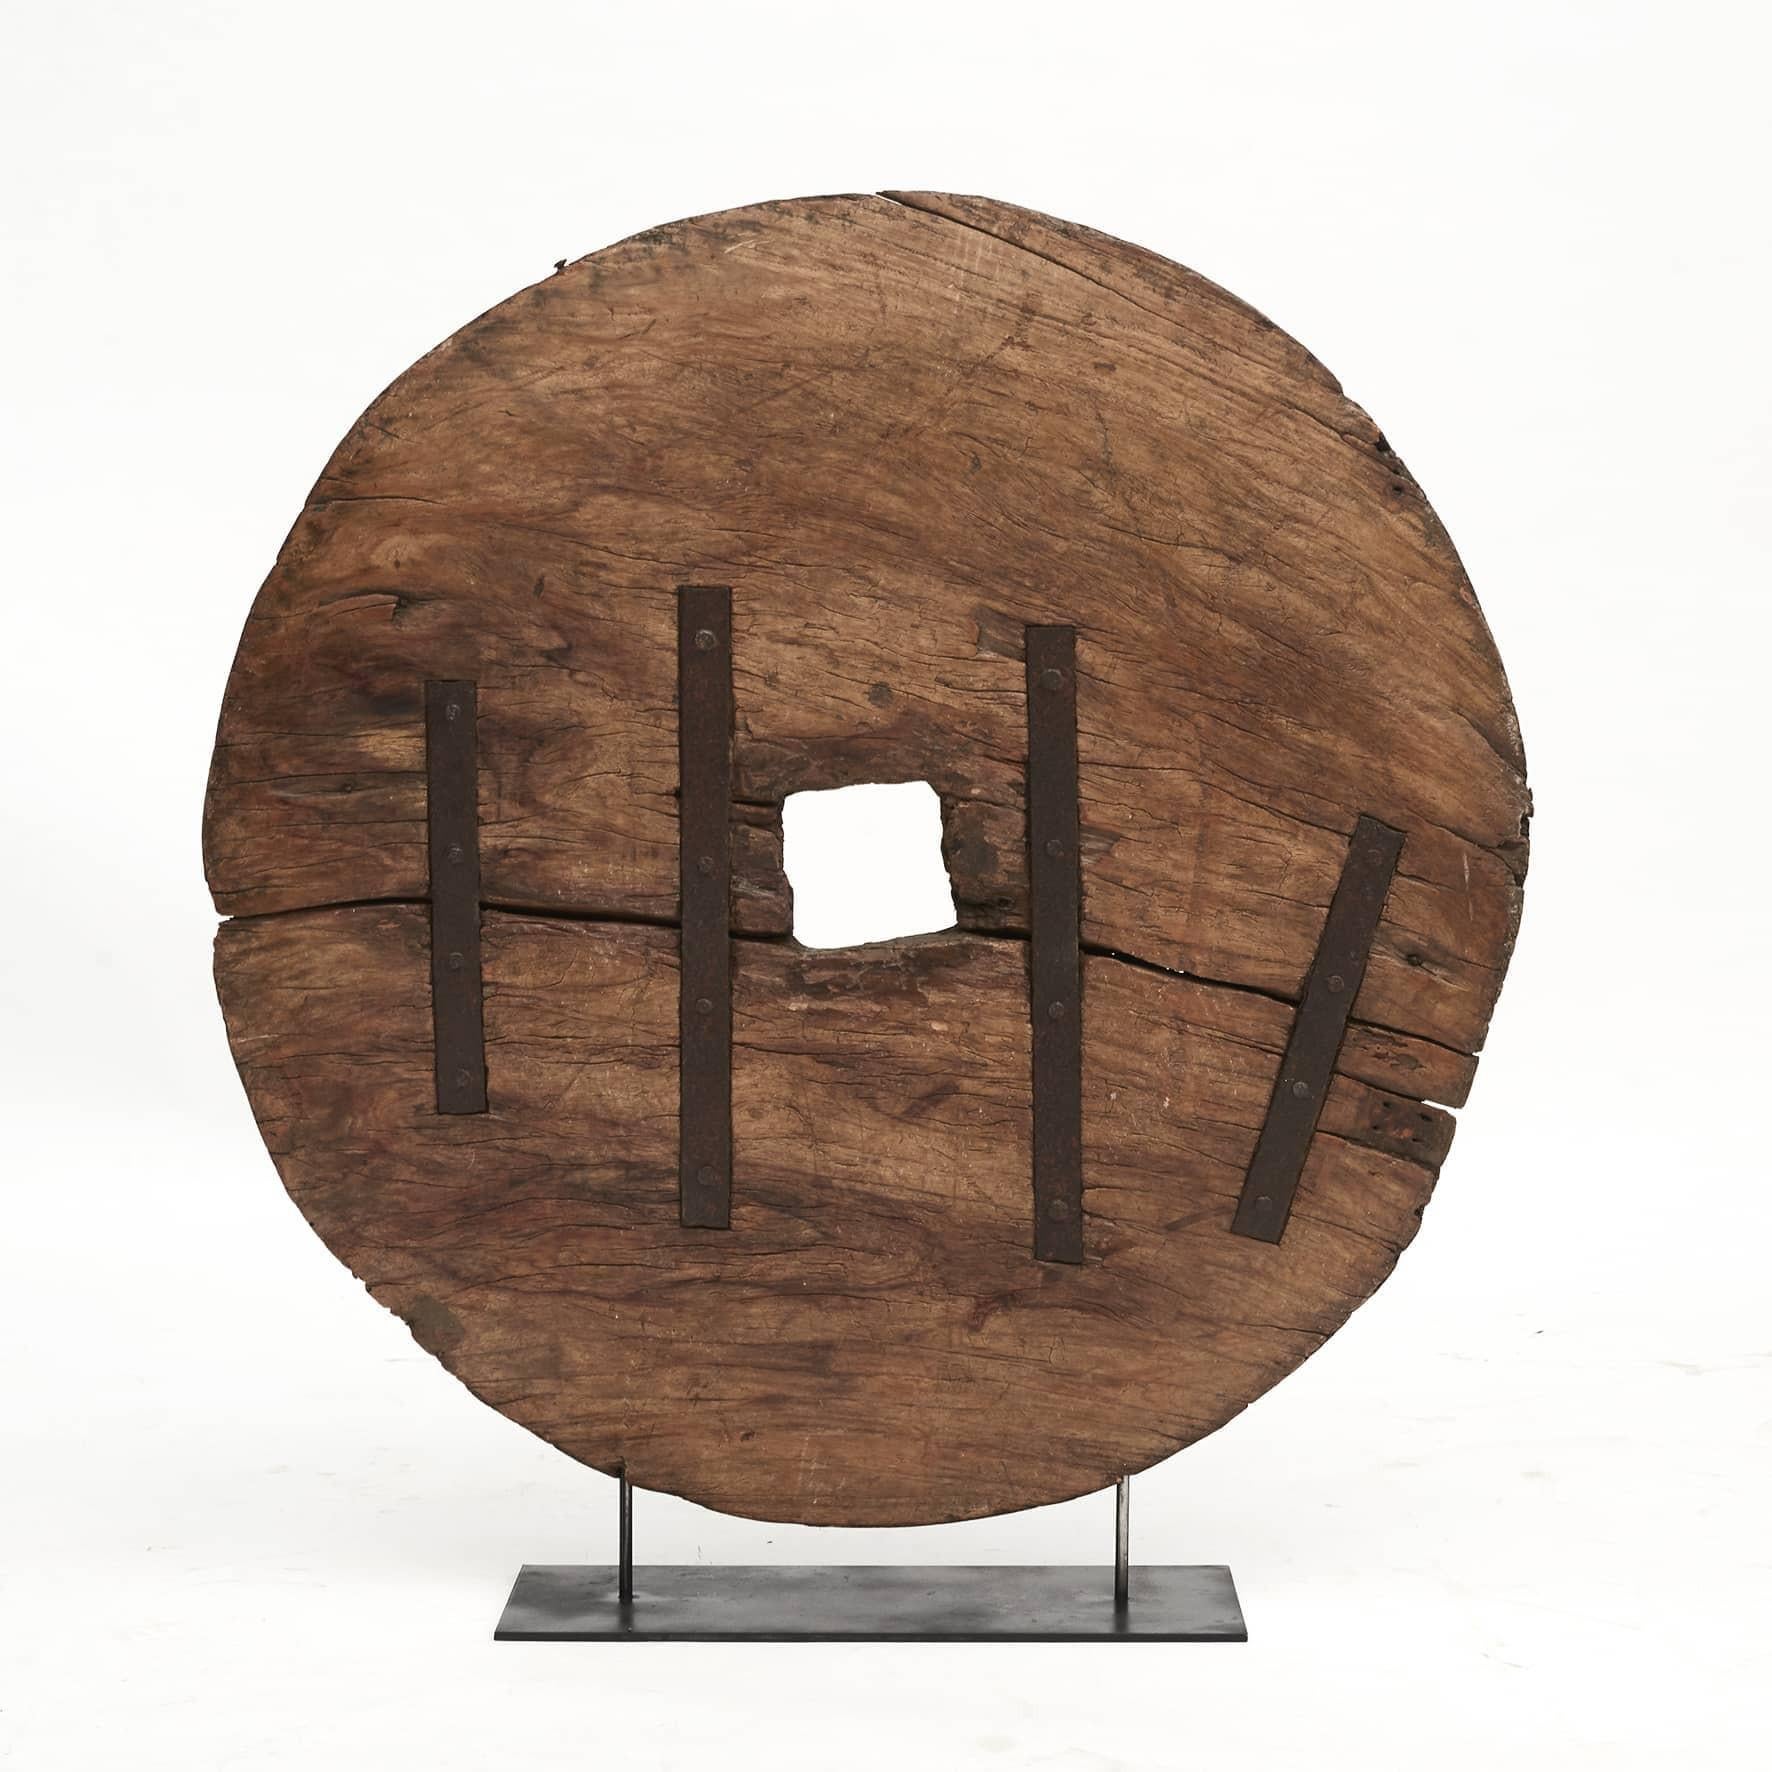 Sculptural and decorative wagon wheel.
Made in one piece of Molave (Nobel wood) ??precious wood with iron fittings.
Base added later.
Today Molave ??is a protected type of wood.
Philippines 19th century.

Measurement (cm) H: 96 - 91 W: 89 D: 8.